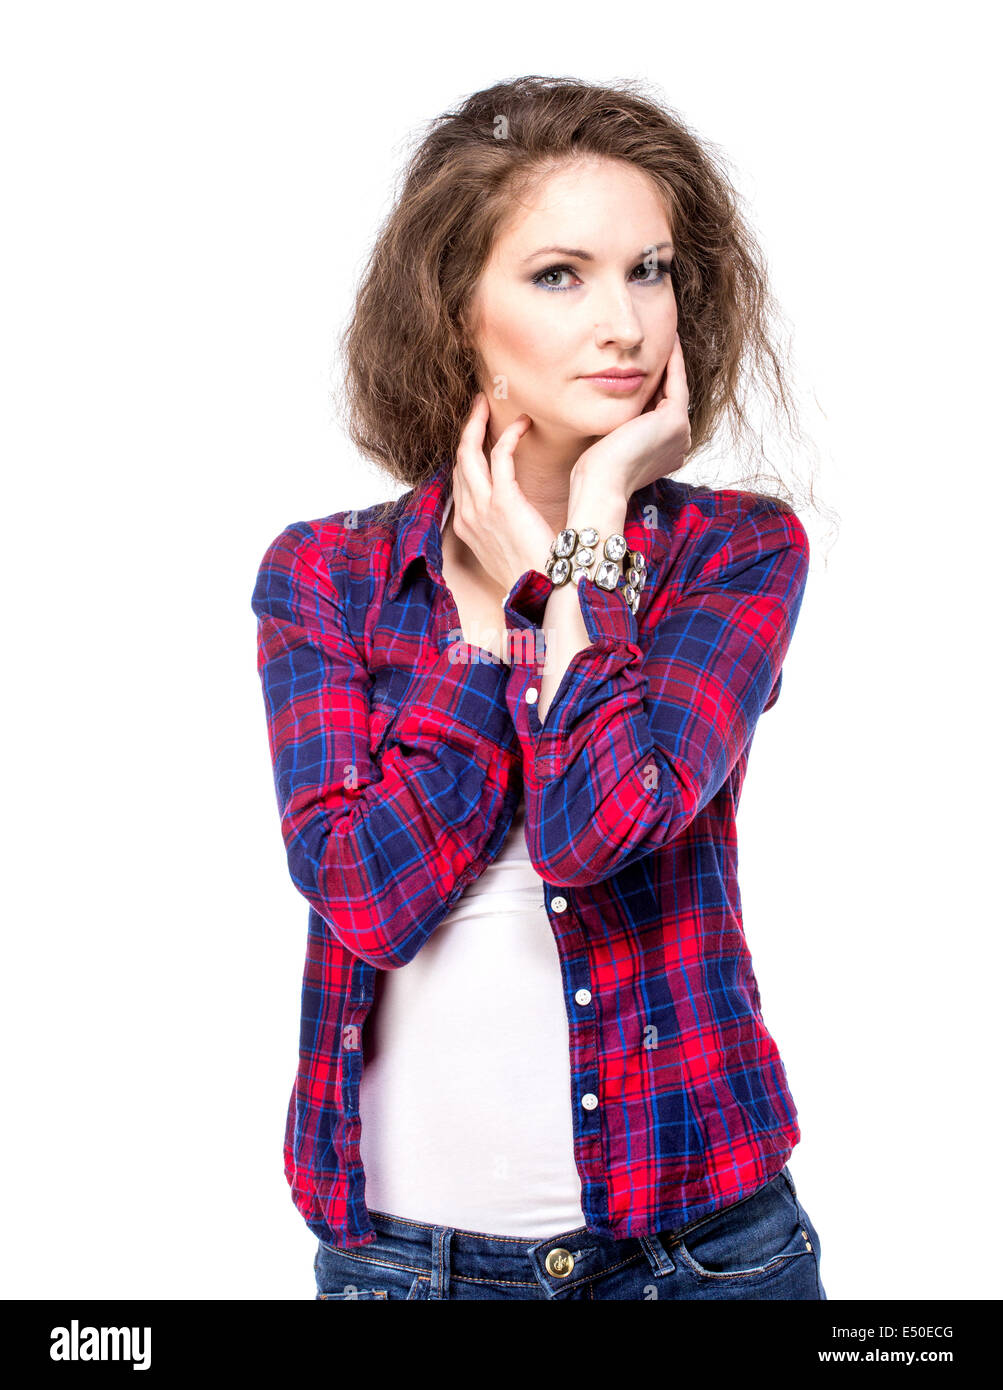 Attractive young woman in a checkered shirt Stock Photo - Alamy